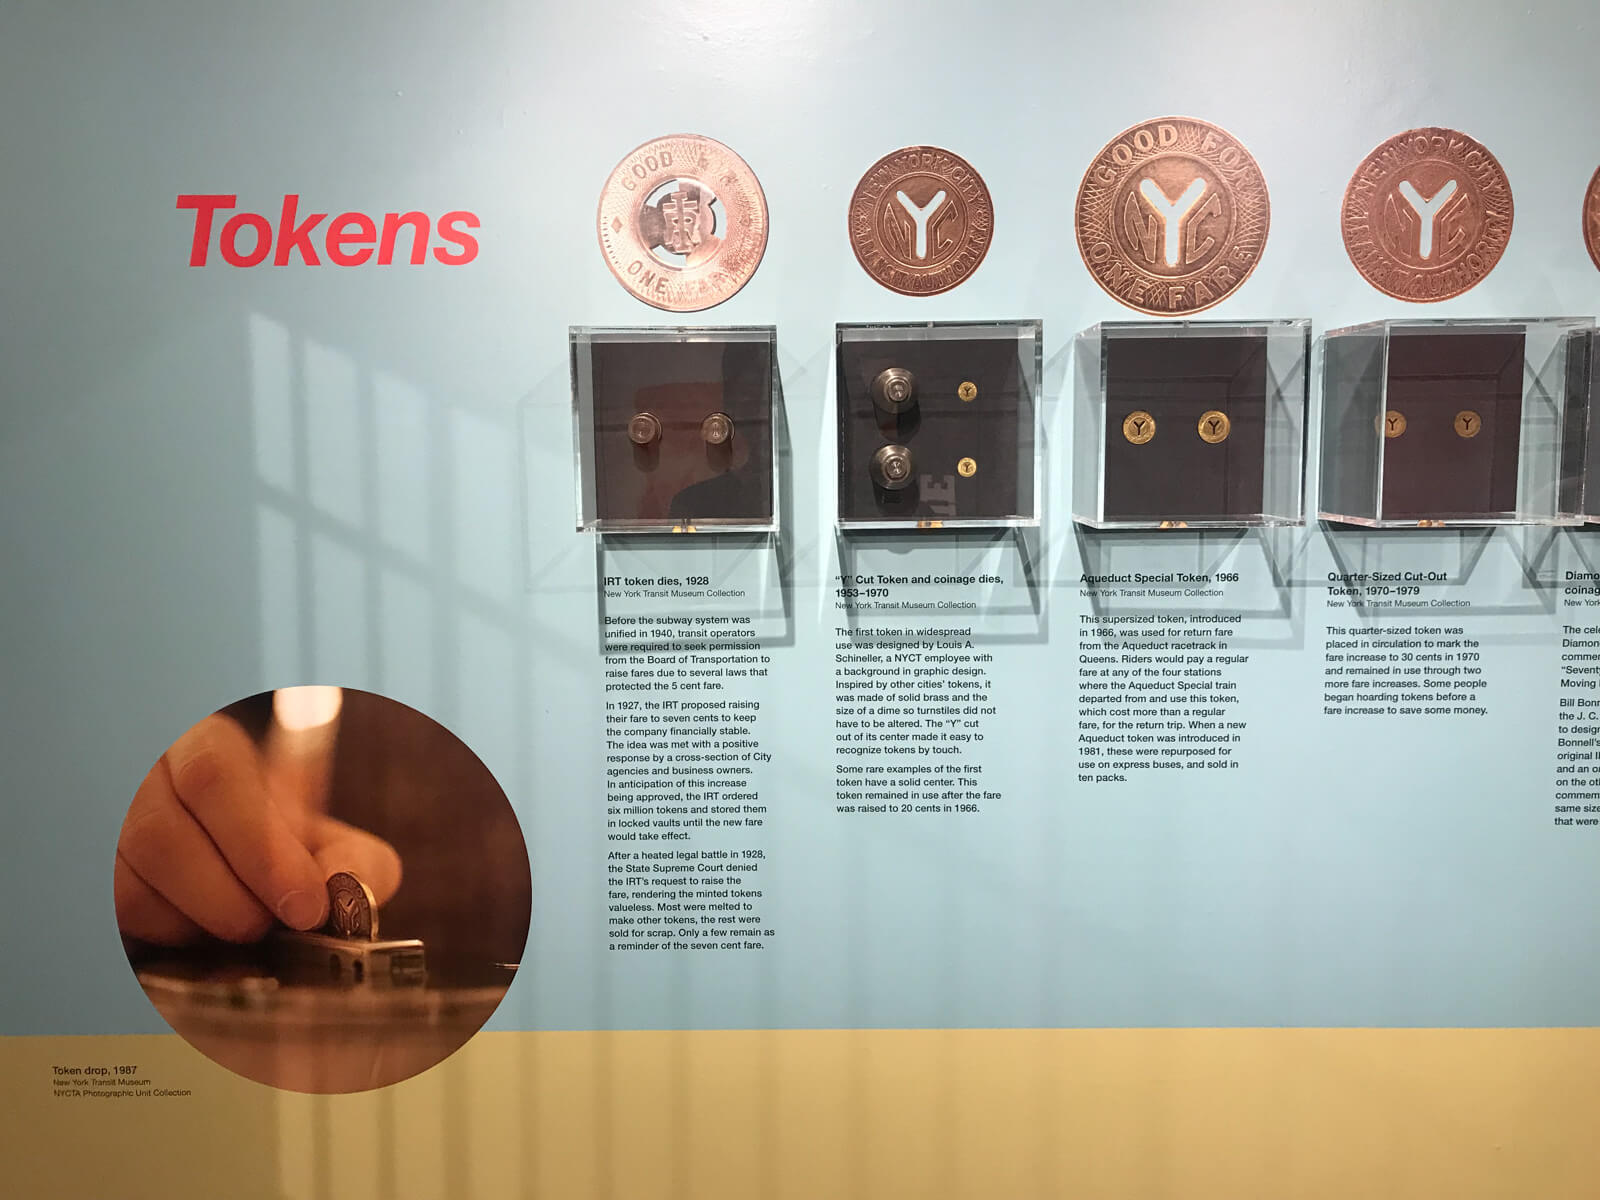 A display of several small glass cabinets showcasing different types of tokens used to pay for train fares